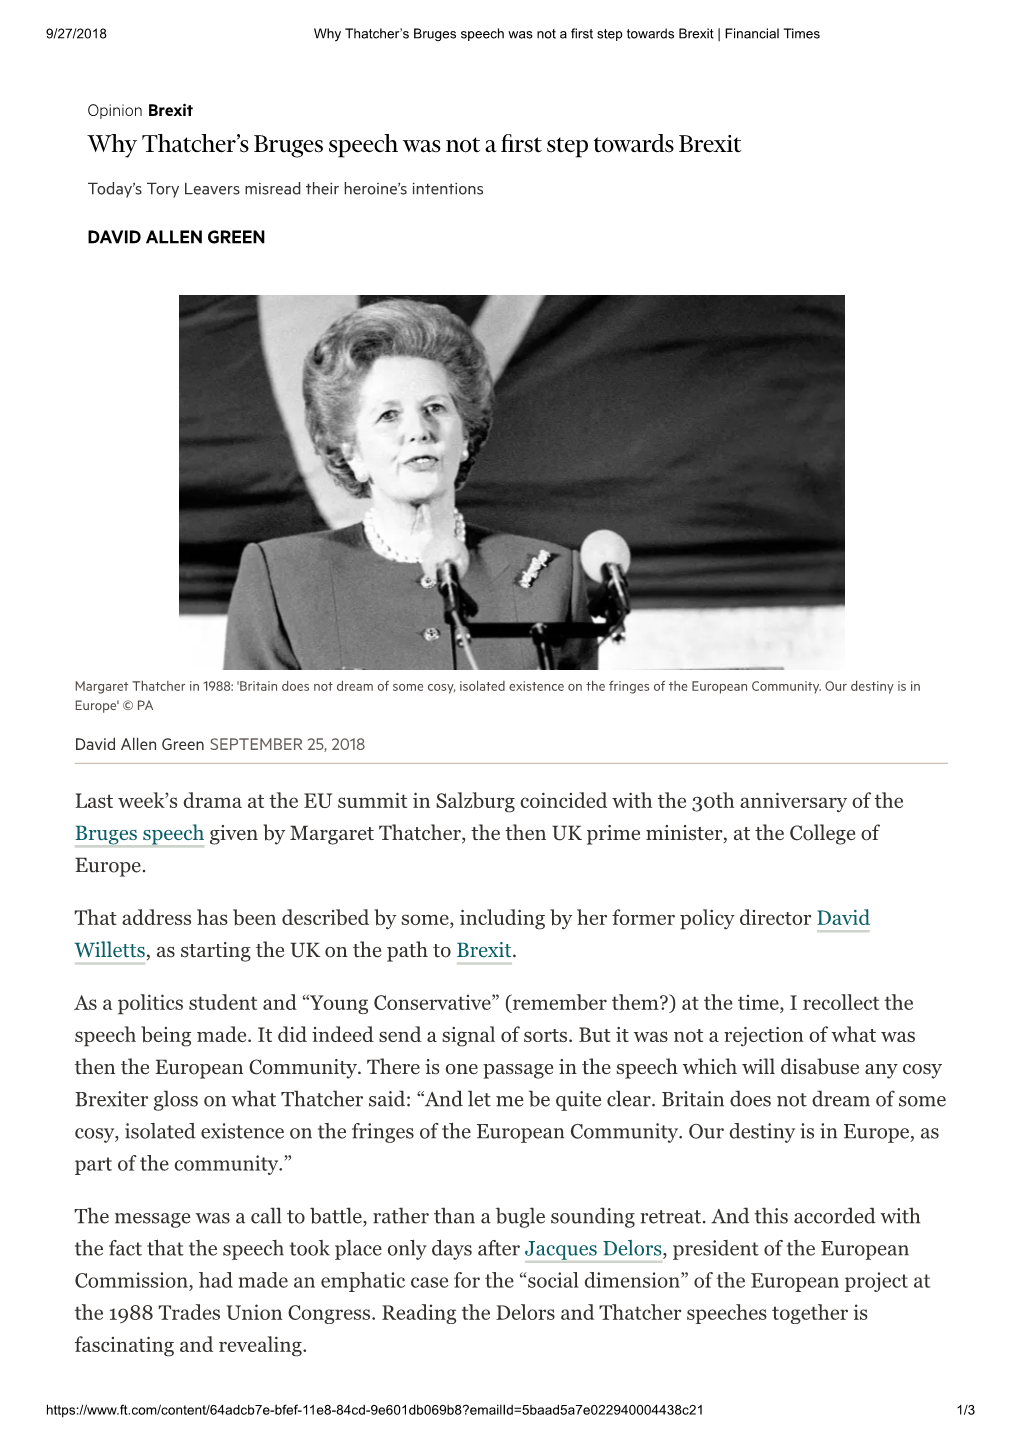 Why Thatcher's Bruges Speech Was Not a First Step Towards Brexit